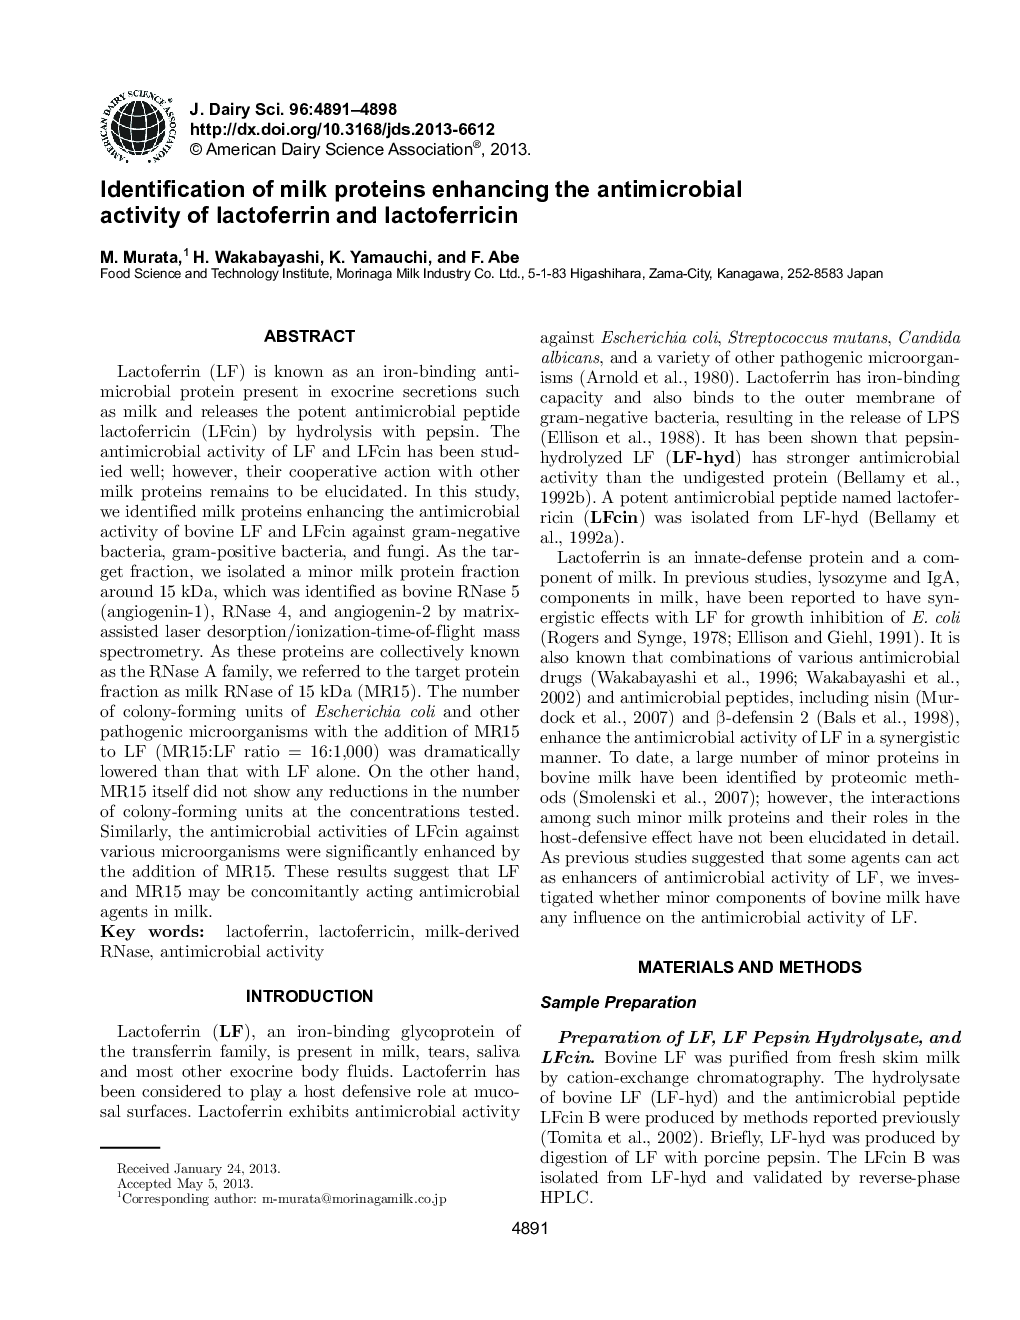 Identification of milk proteins enhancing the antimicrobial activity of lactoferrin and lactoferricin